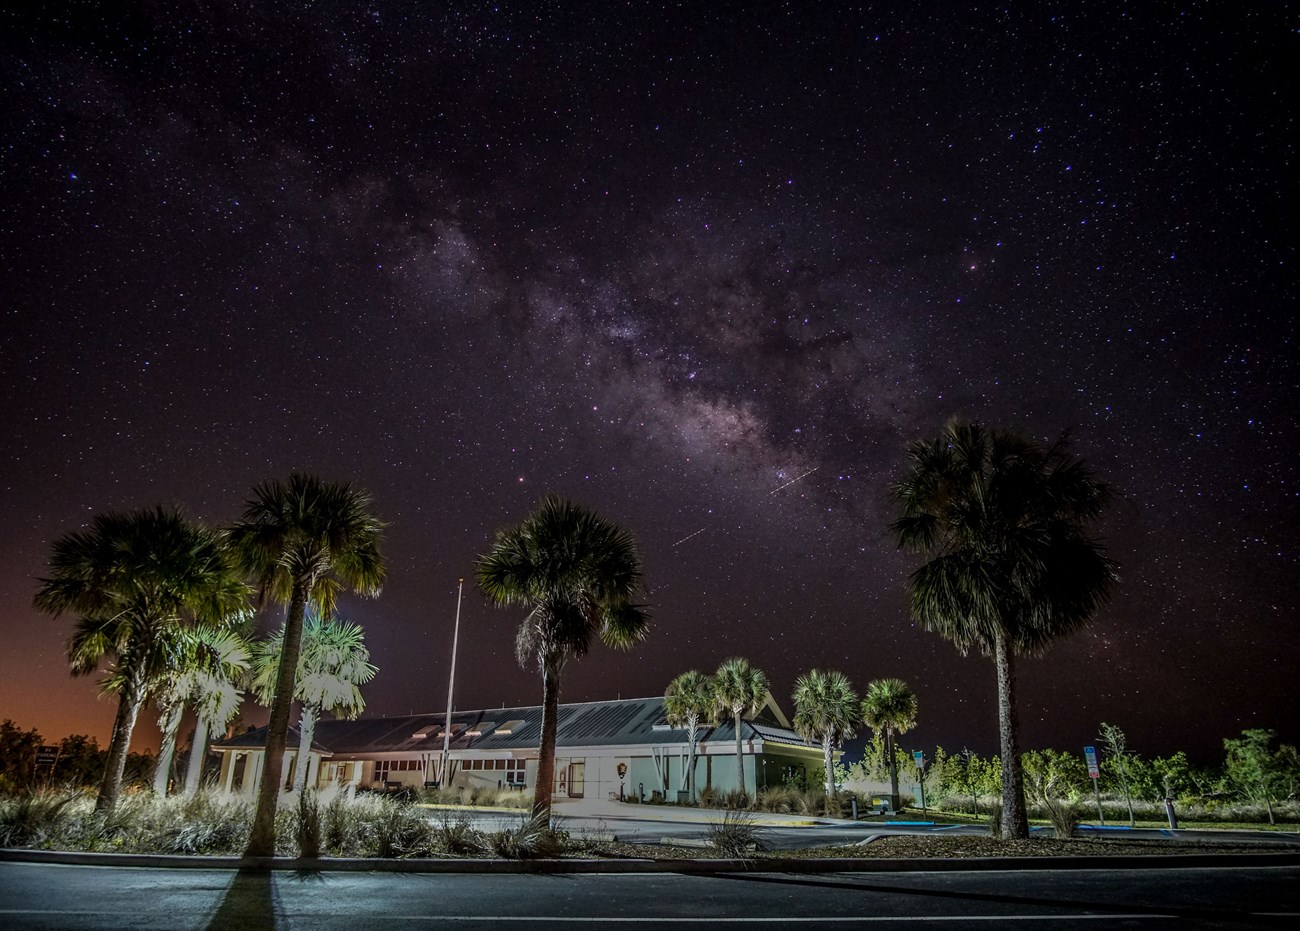 a building, palm trees, parking lot illuminated under a night sky